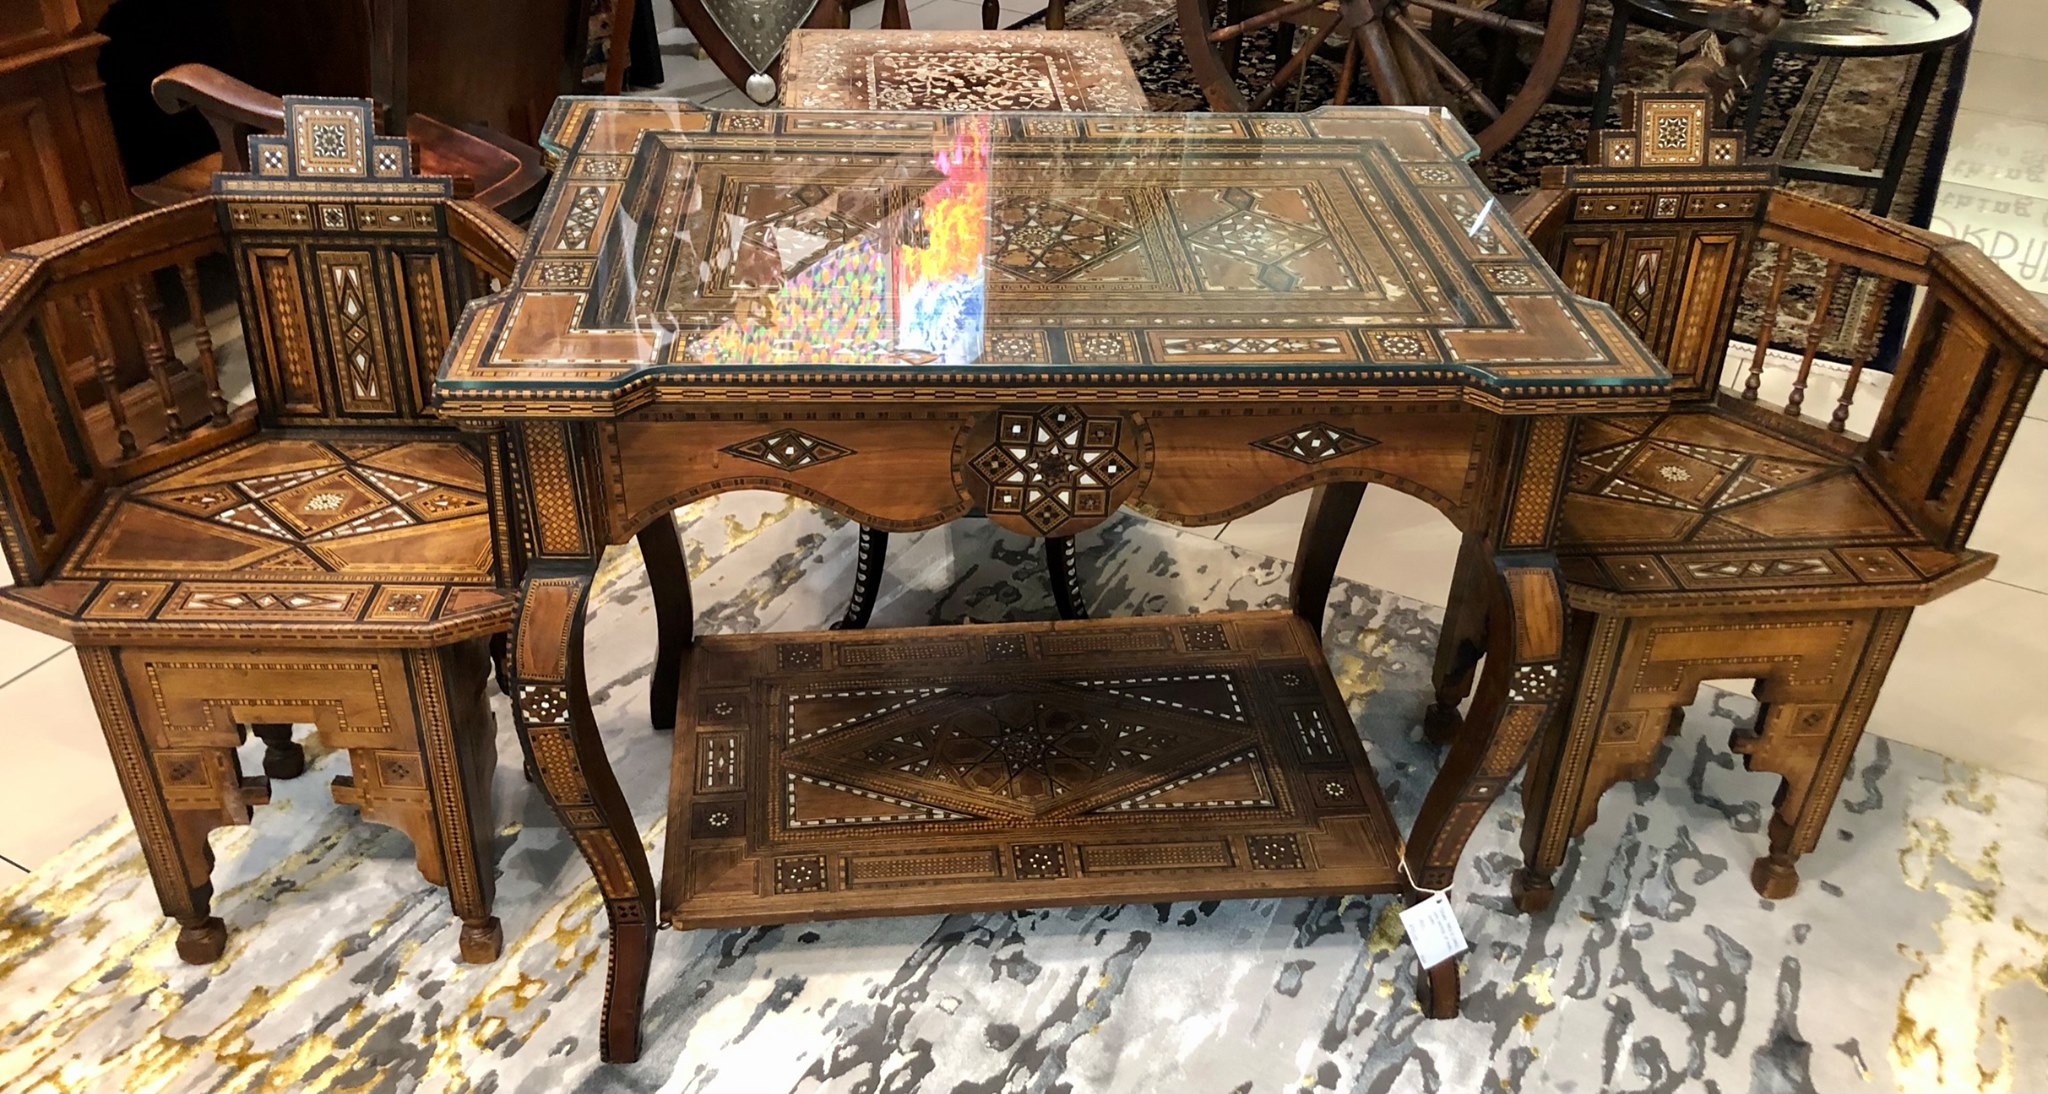 Early 20th Century Syrian games table and chairs with multiple geometric and asymmetric marquetry in various woods and mother-of-pearl. Table Size: 0.78m (height) x 0.94m (width) x 0.62m (depth)  Price for table and chairs set: R90,000.00